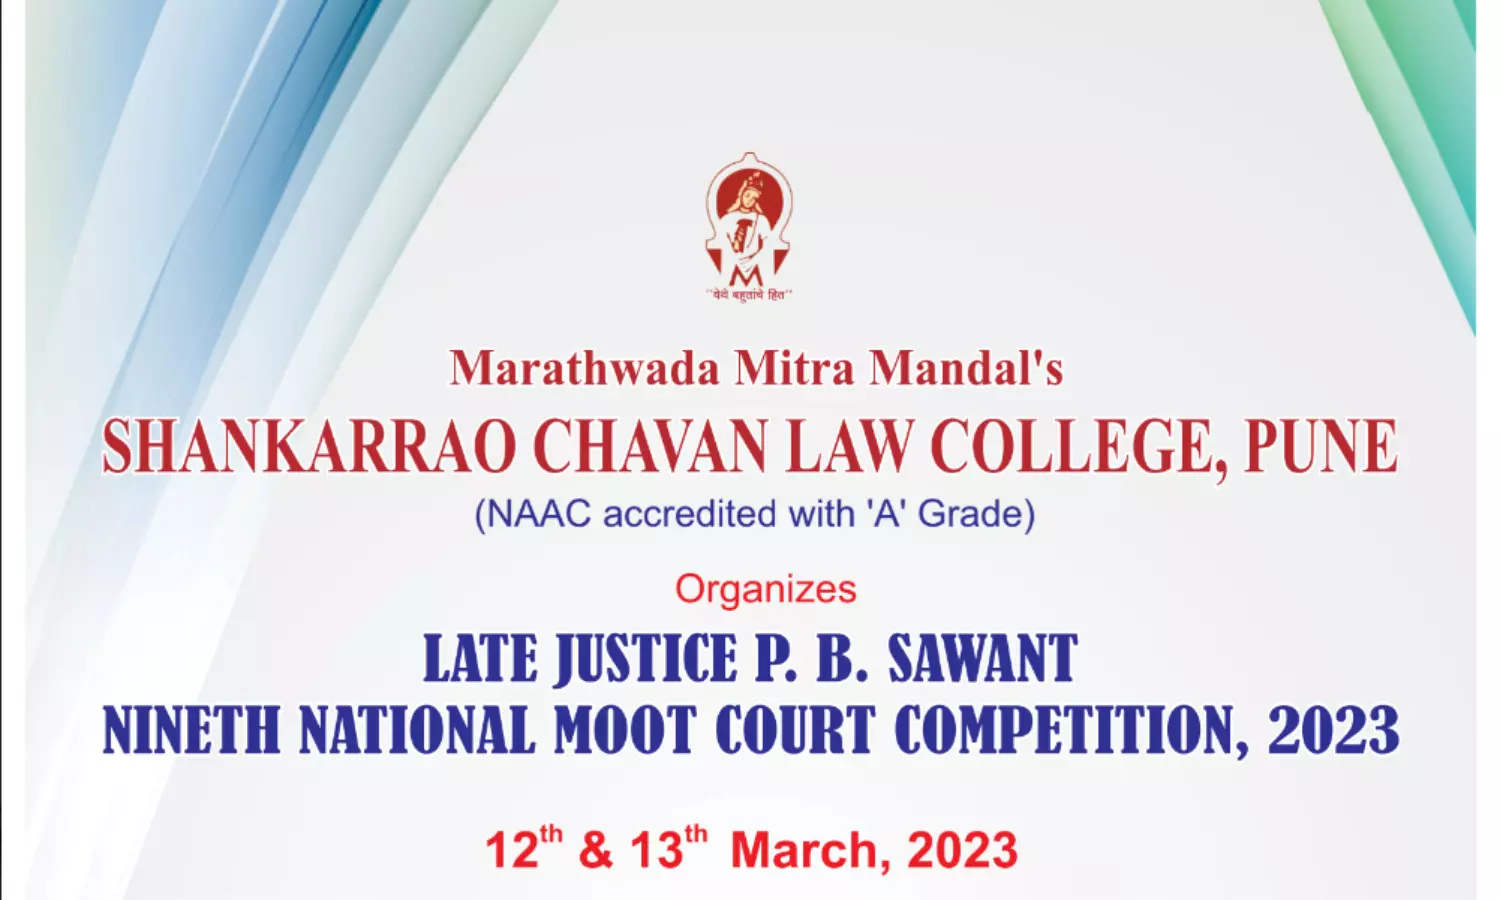 Late Justice PB Sawant Ninth National Moot Court Competition, 2023 | Shankarrao Chavan Law College | Register by 1st March 2023.